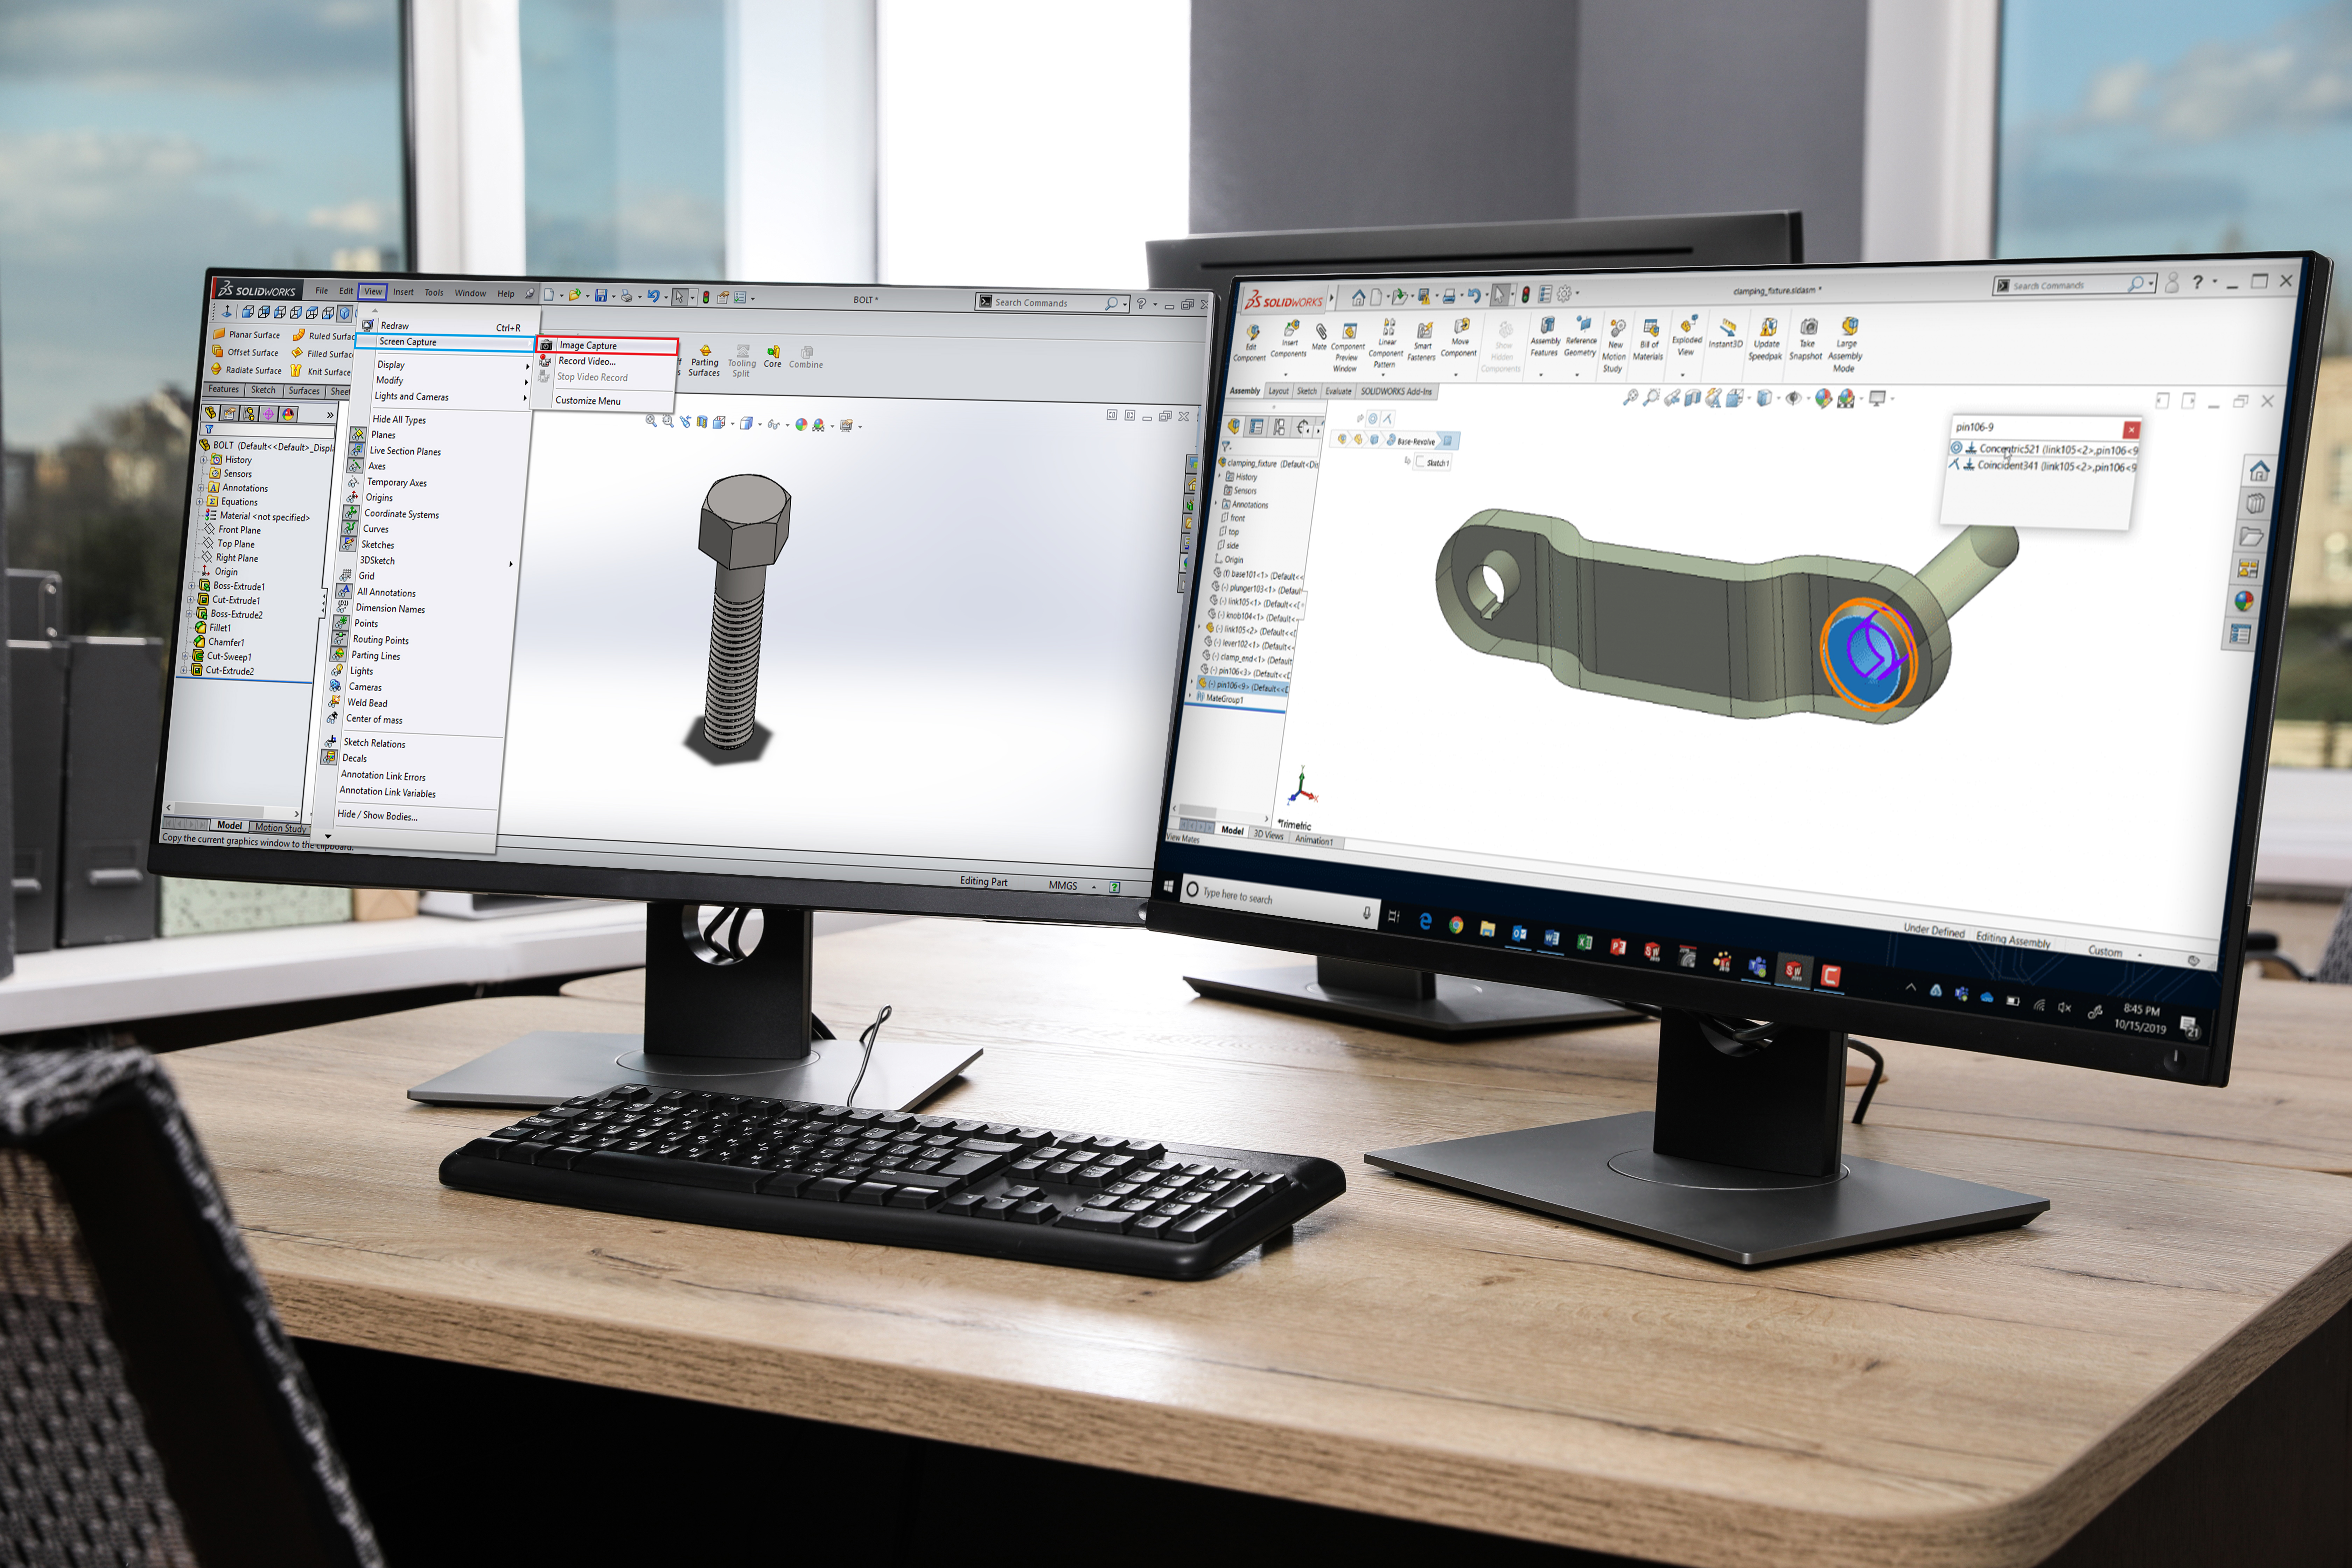 Solidworks software on a computer.